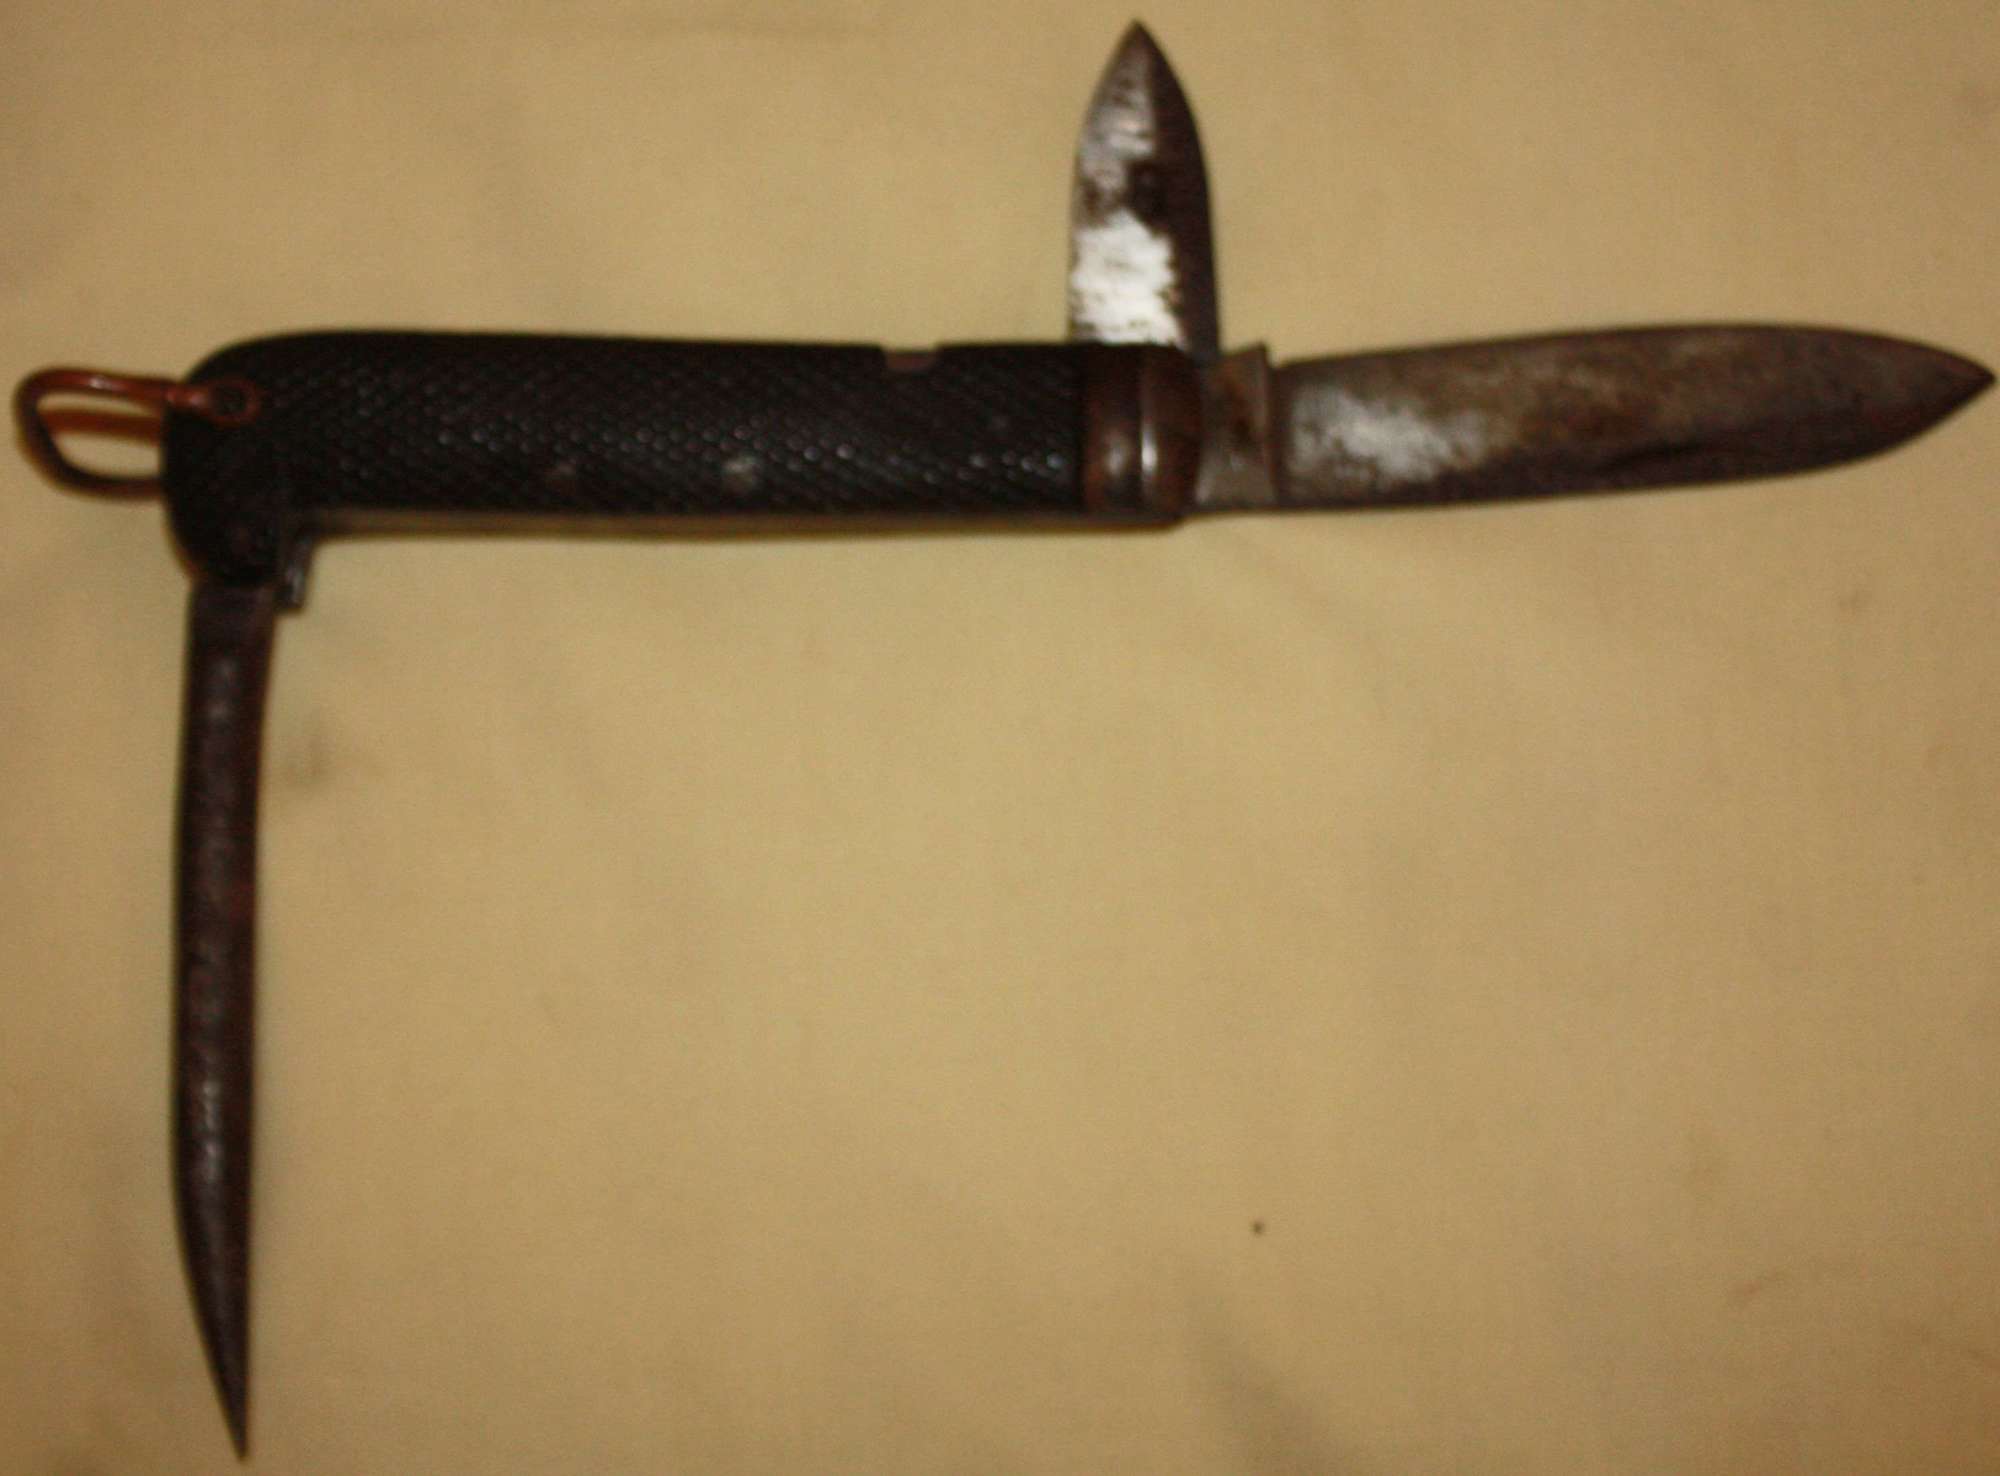 A BRITISH ARMY PRE WWII LARGE SIZE CLASP KNIFE